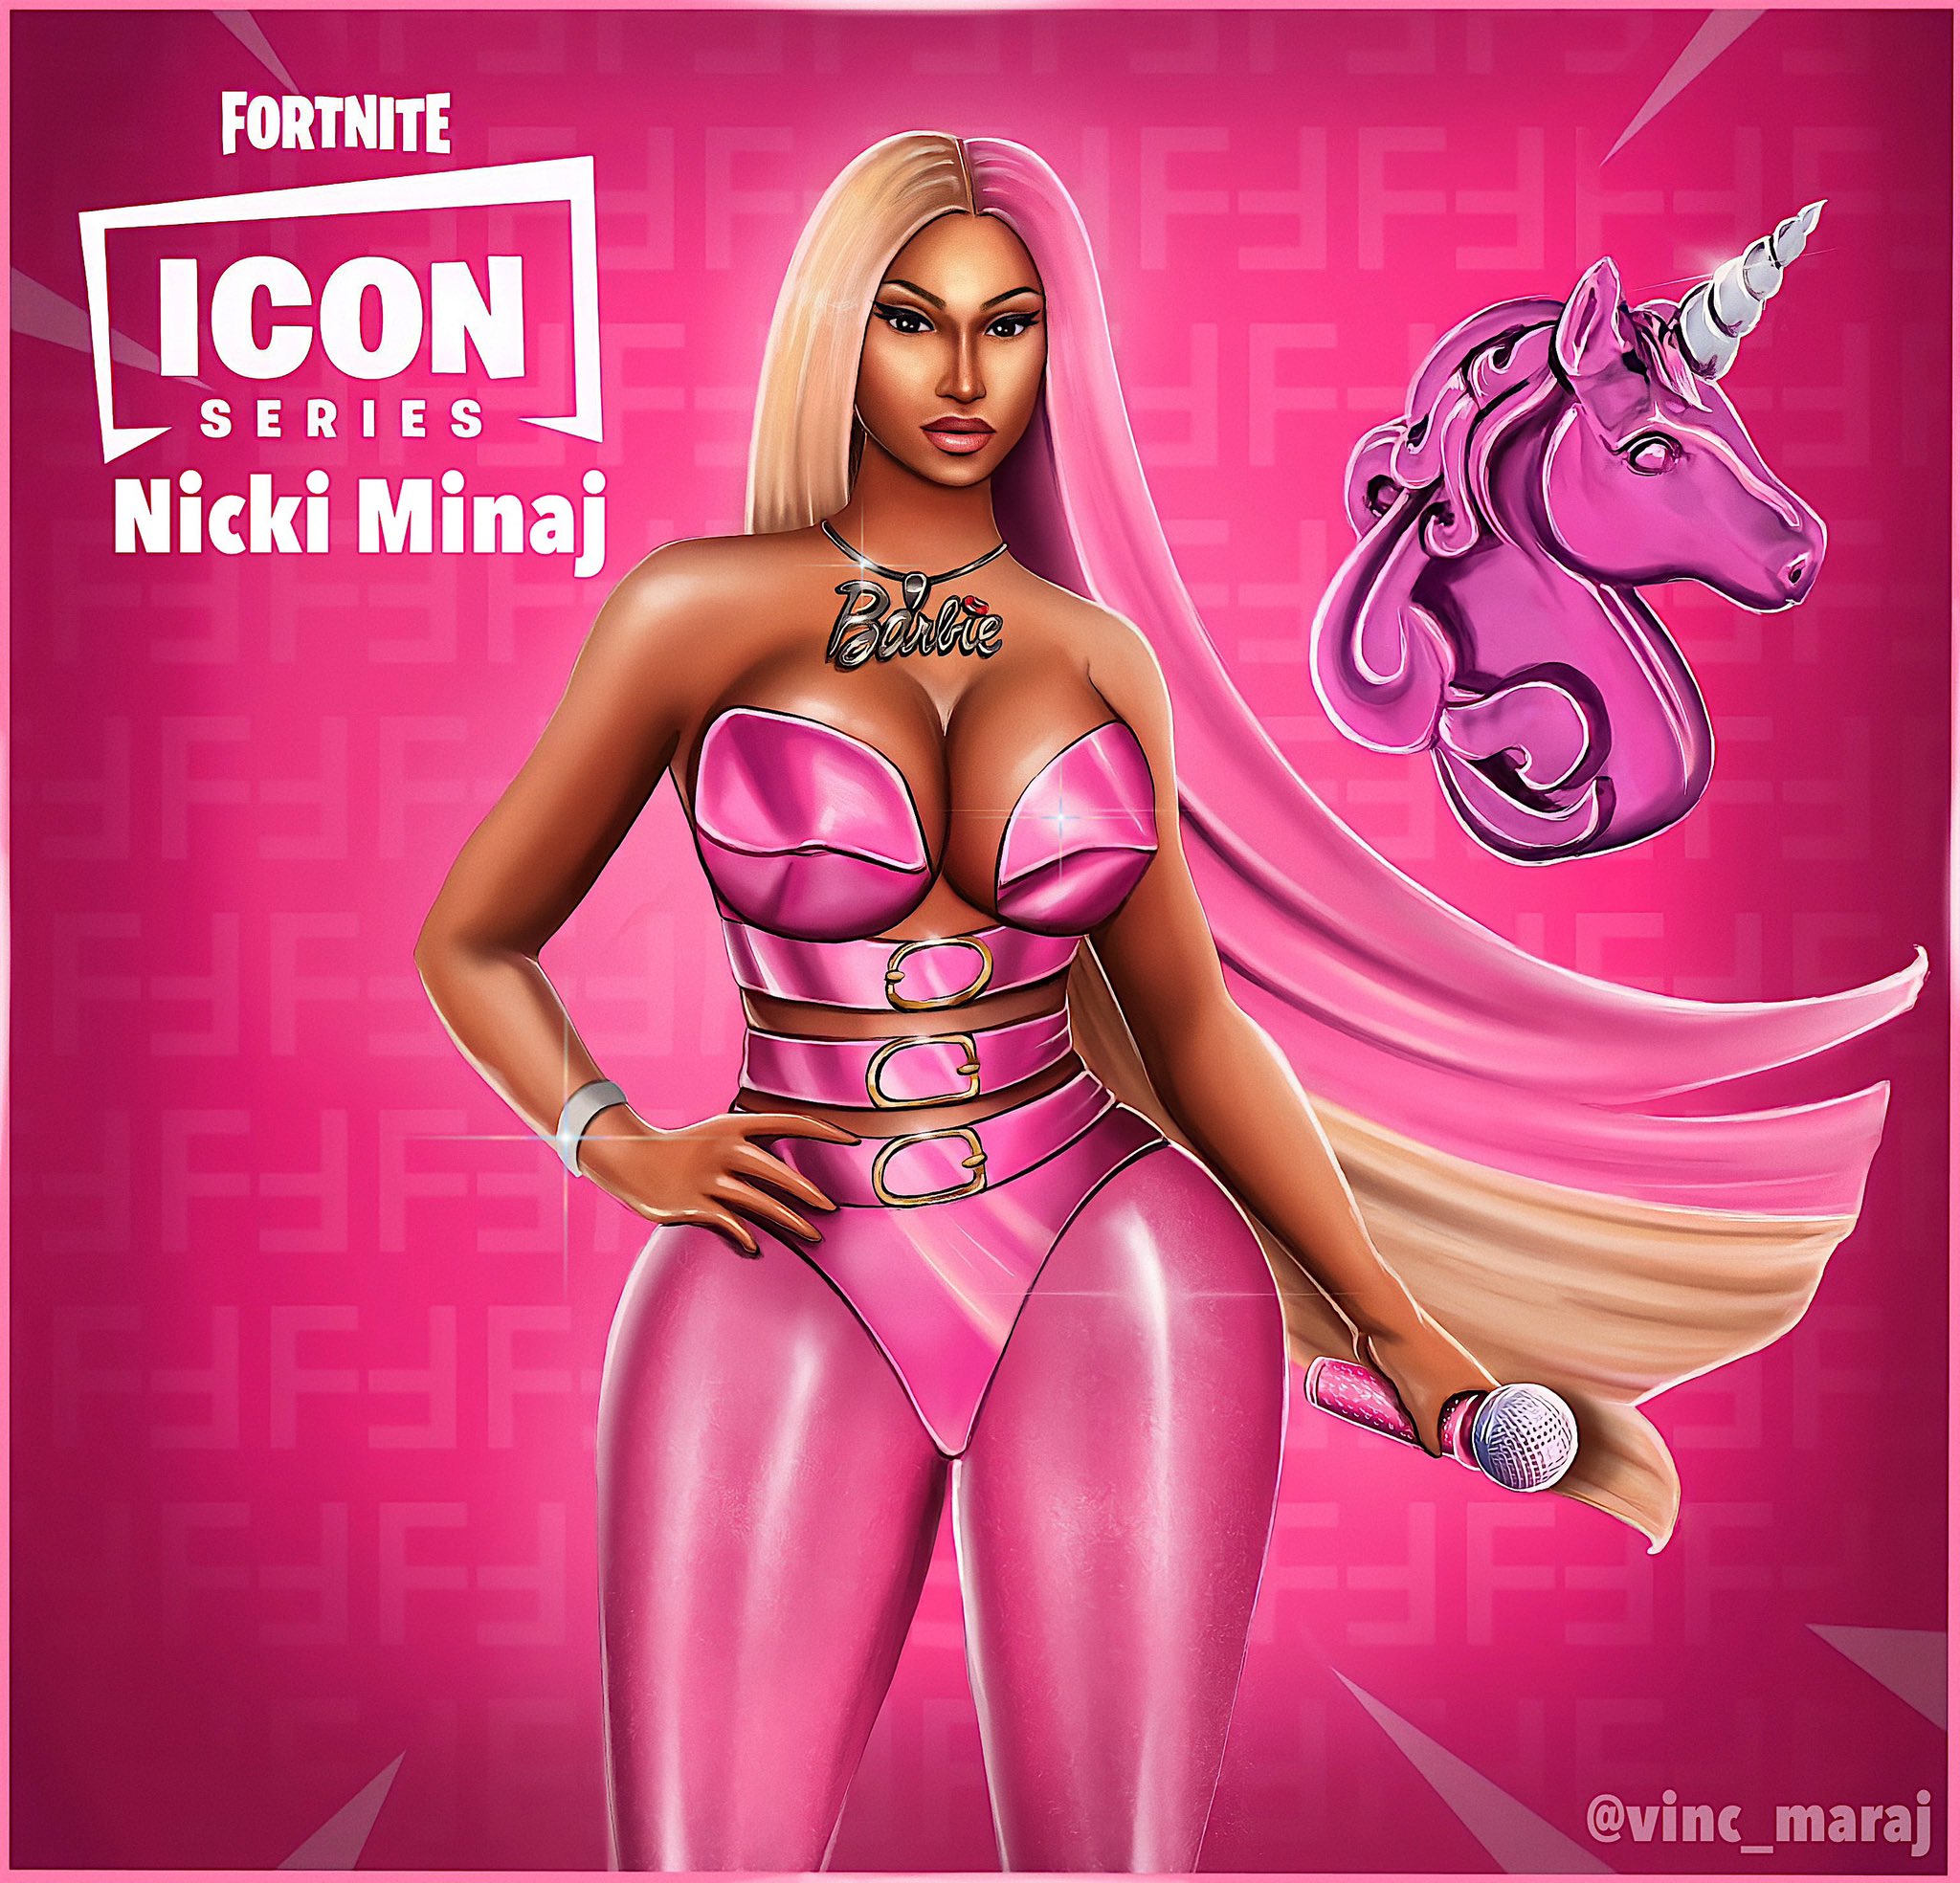 hænge Narkoman Der er en tendens Vinc Maraj on Twitter: "NICKI MINAJ FORTNITE ICON SERIES SKIN CONCEPT 🦄.  I've always wanted to create something like this, and finally I find the  inspiration from @D3NNI_yt 🙏🏼. Oh and the